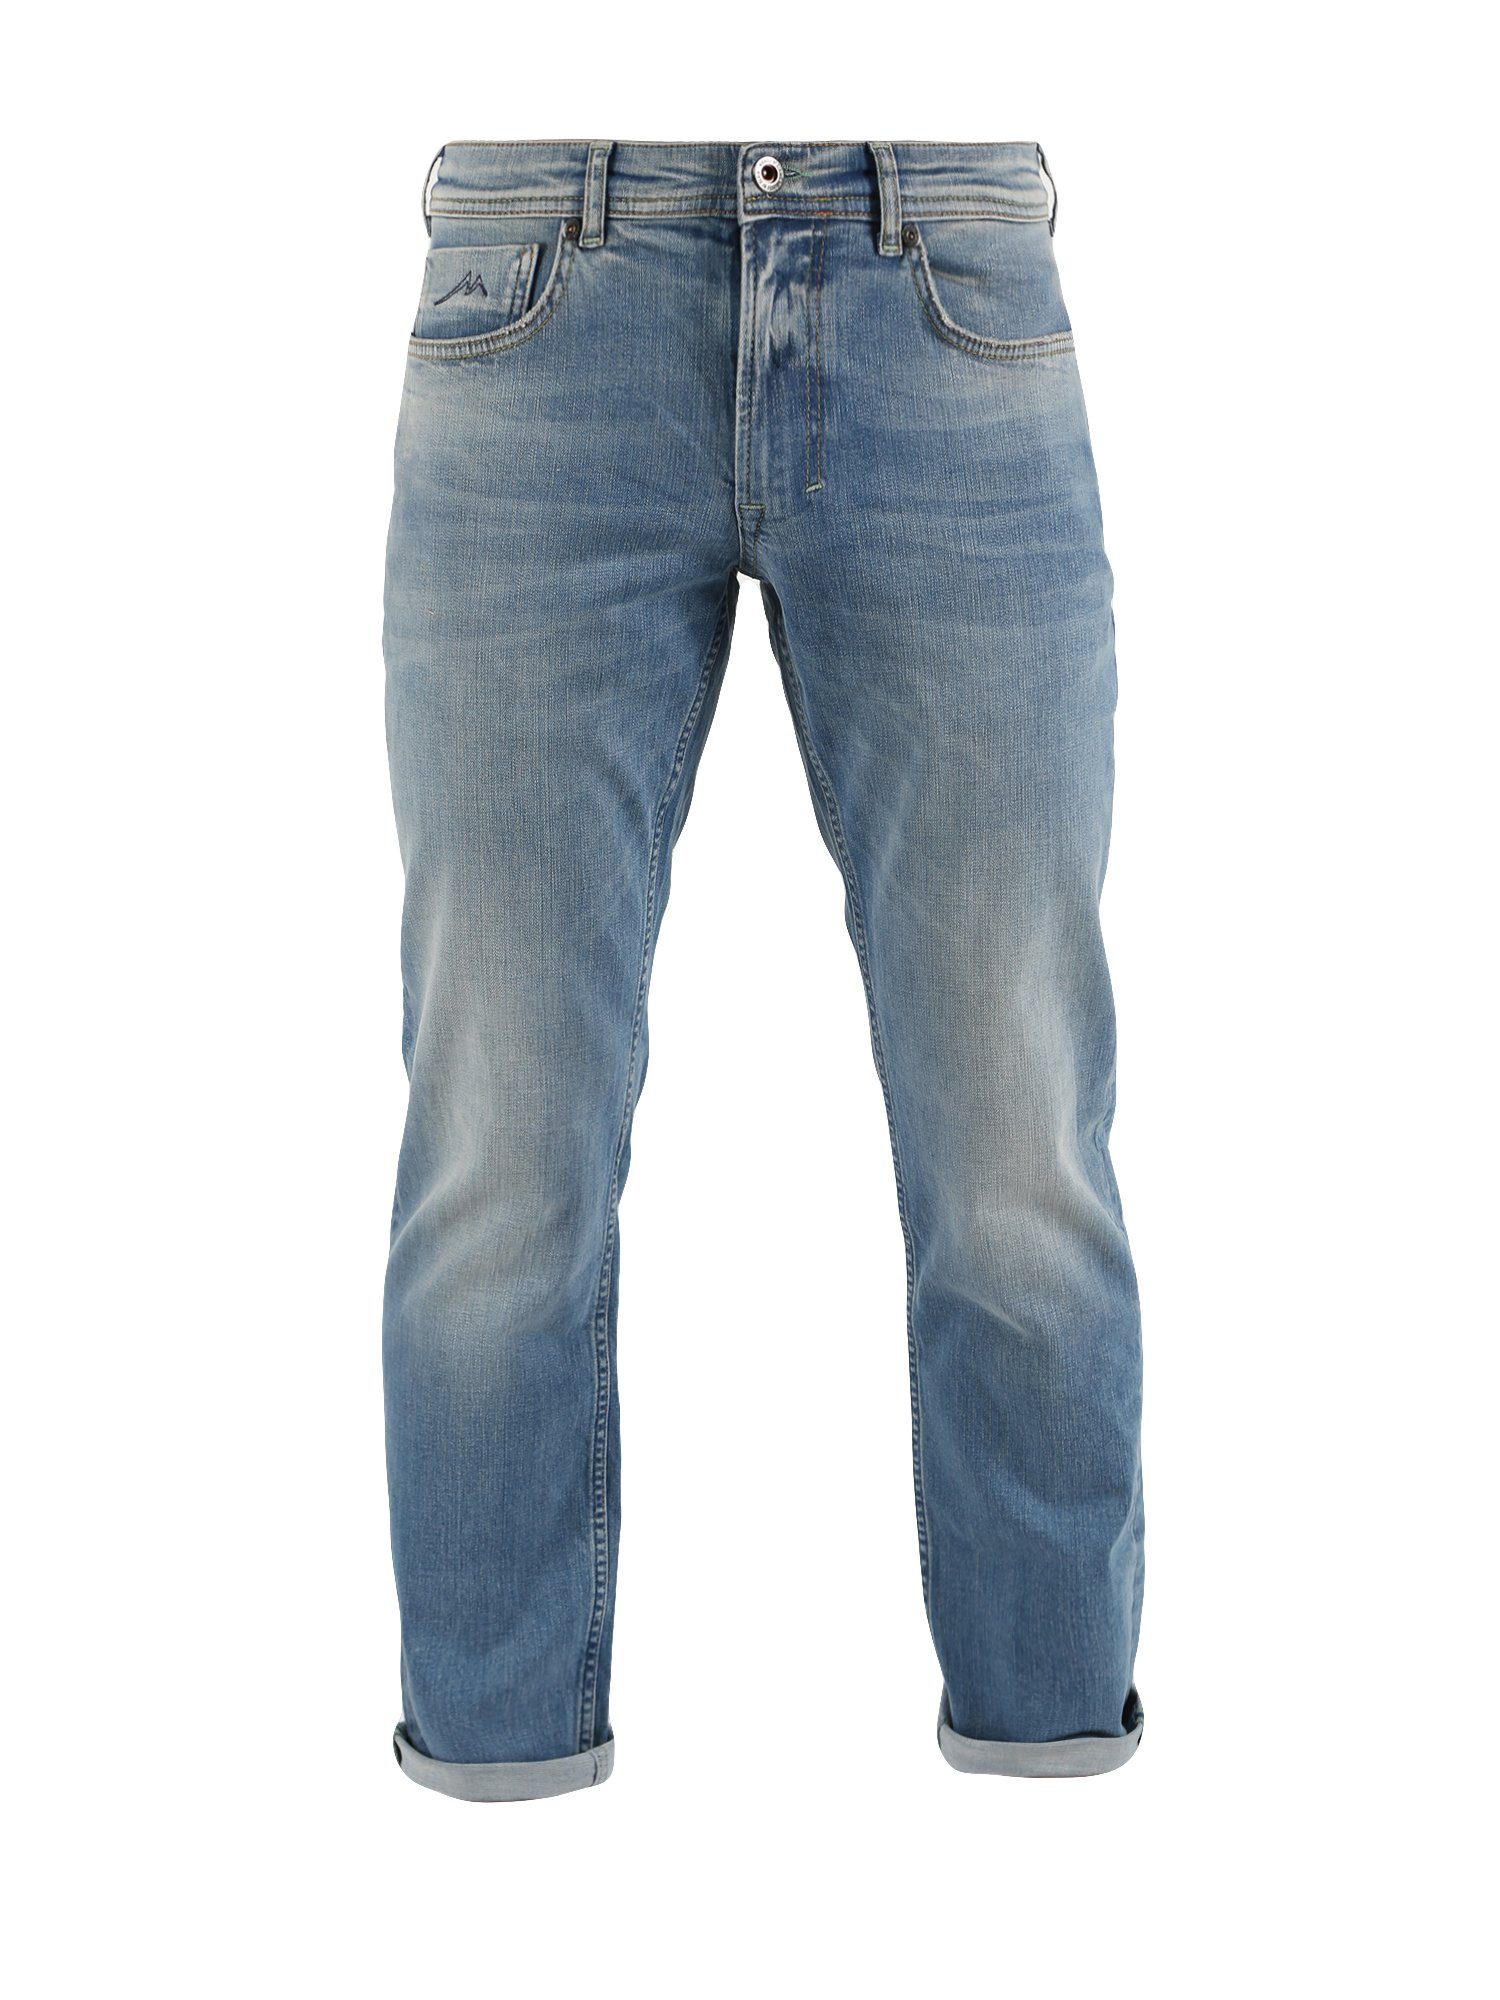 Miracle of Denim 5-Pocket-Jeans MOD JEANS THOMAS lincoln blue SP21-1009.1977